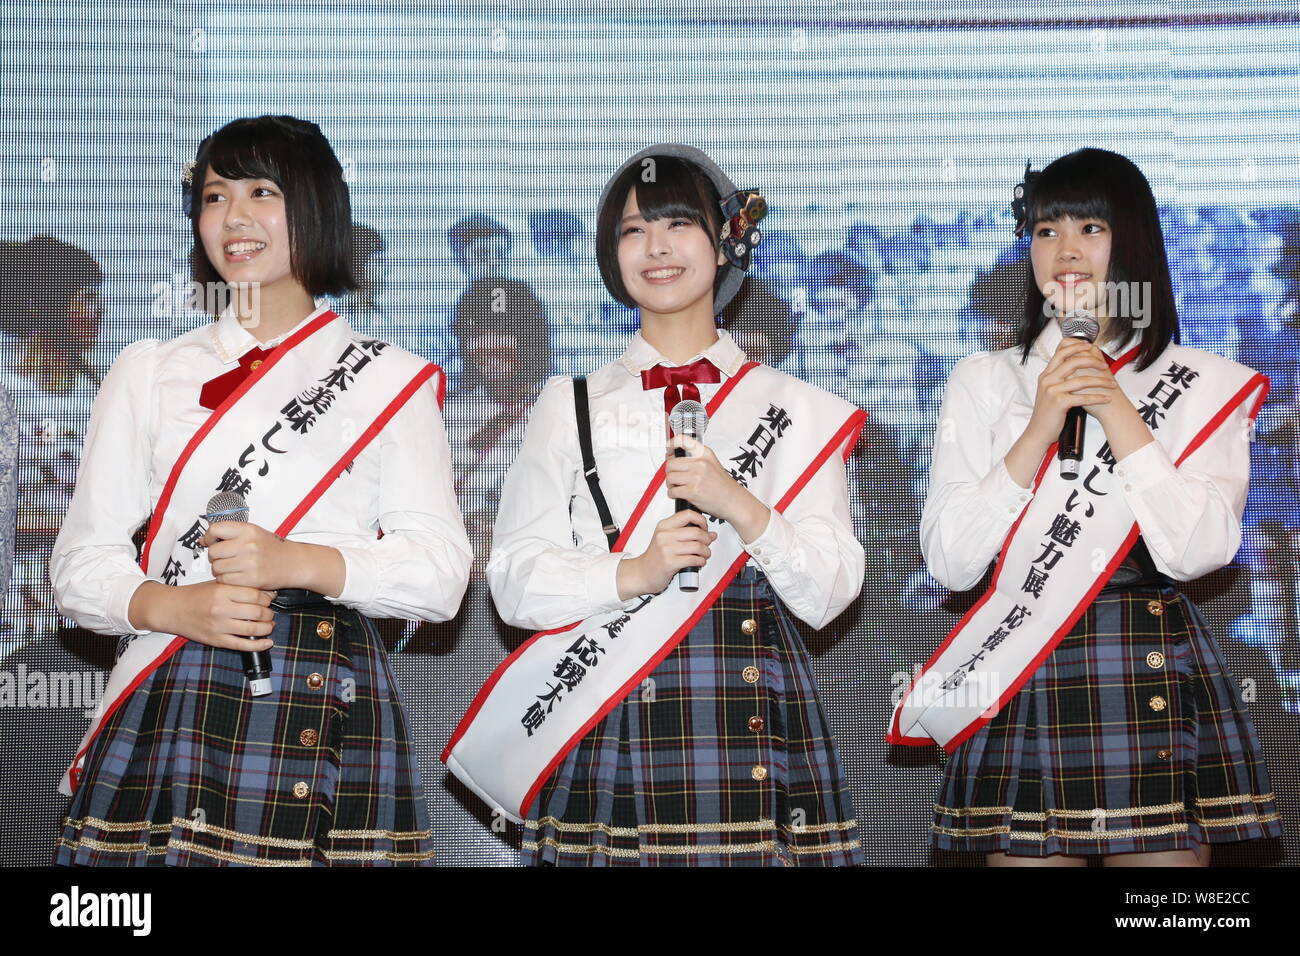 (From left) Maria Shimizu, Shiori Sato and Nanase Yoshikawa of the Team 8 of Japanese idol gril group AKB48 attend a promotional event for Japanese fo Stock Photo